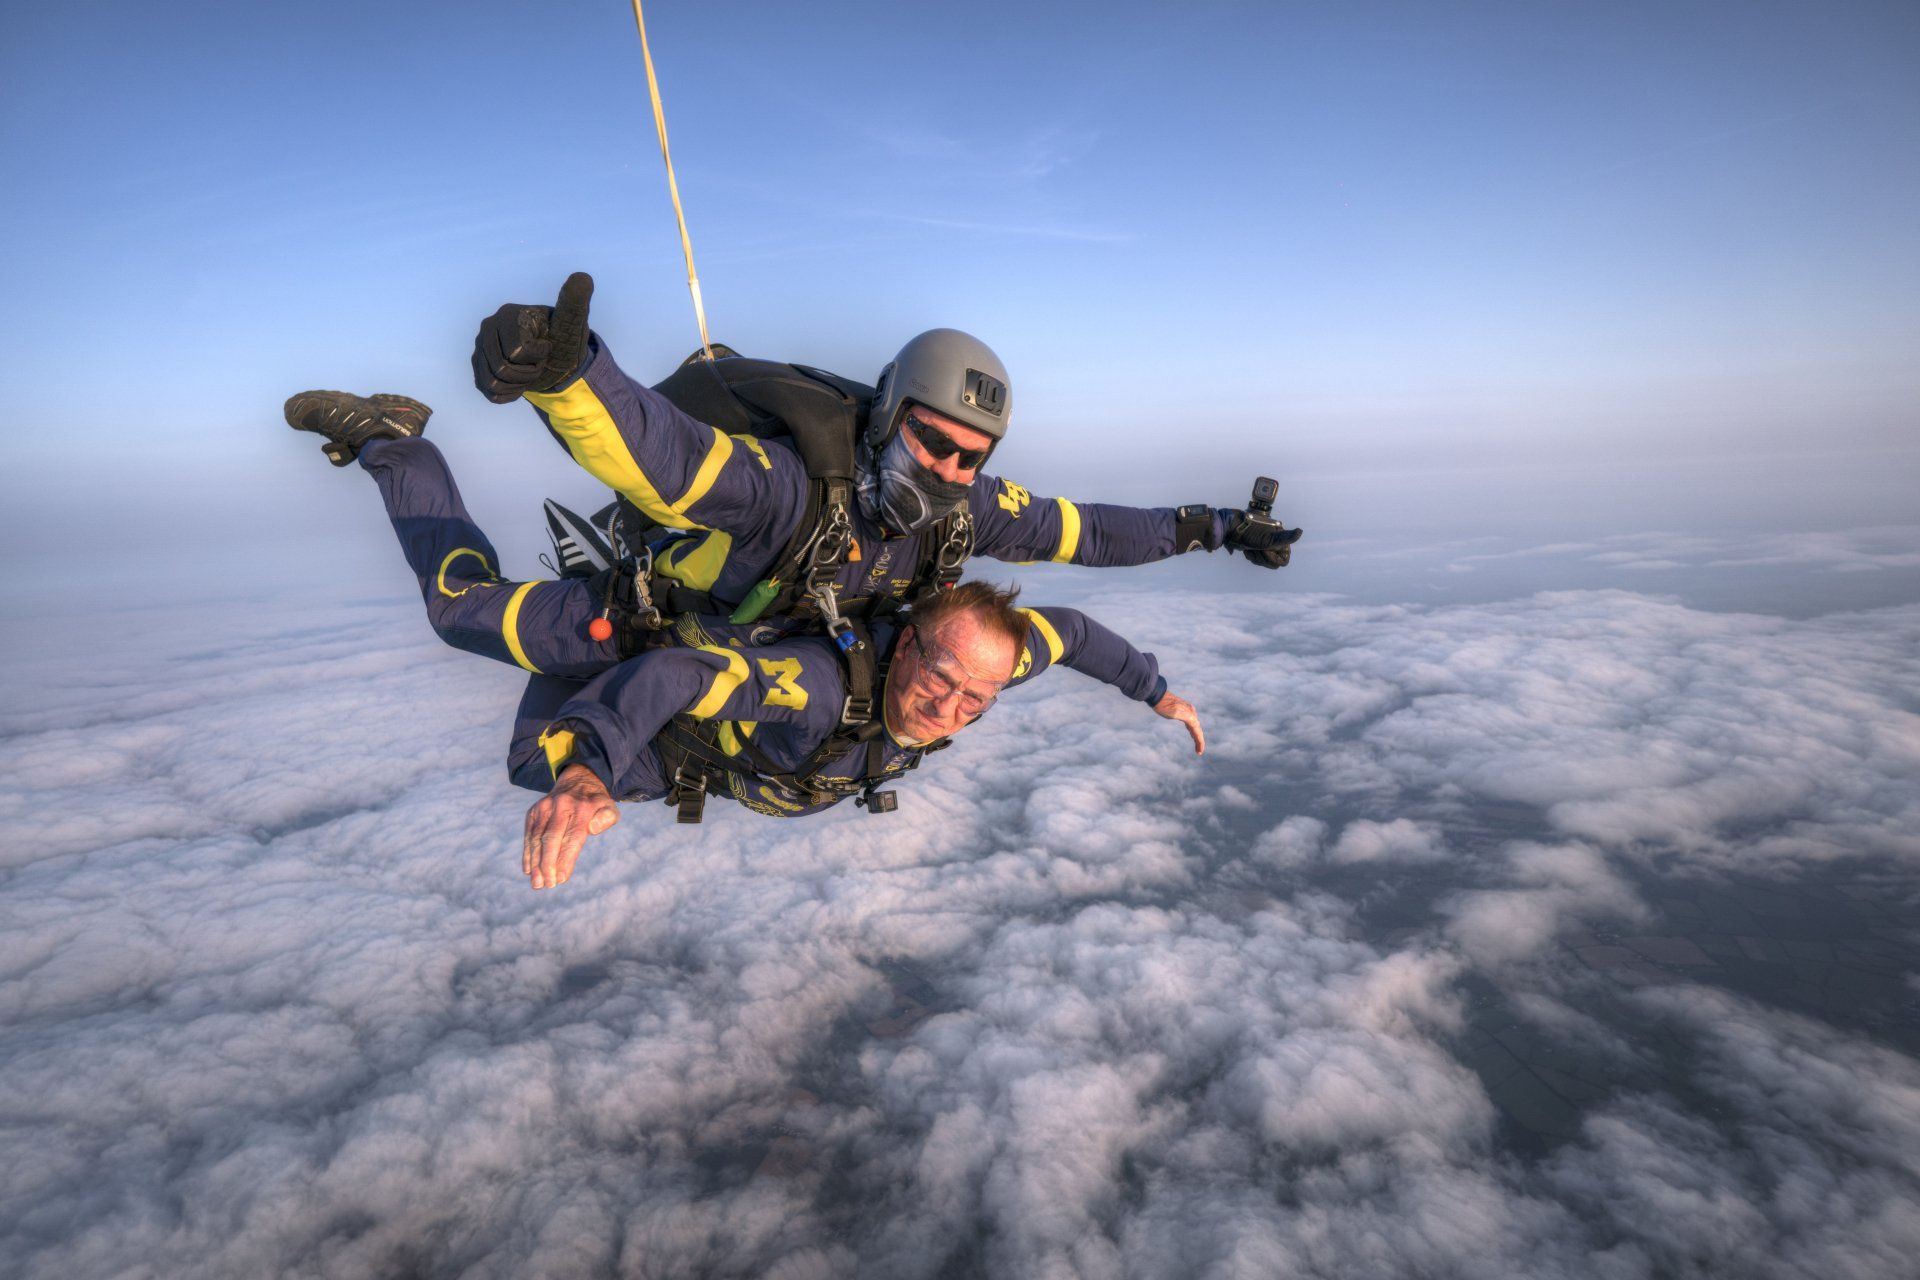 Fastest time to tandem skydive all seven continents: James C. Wigginton and Thomas J. Noonan lll set world record